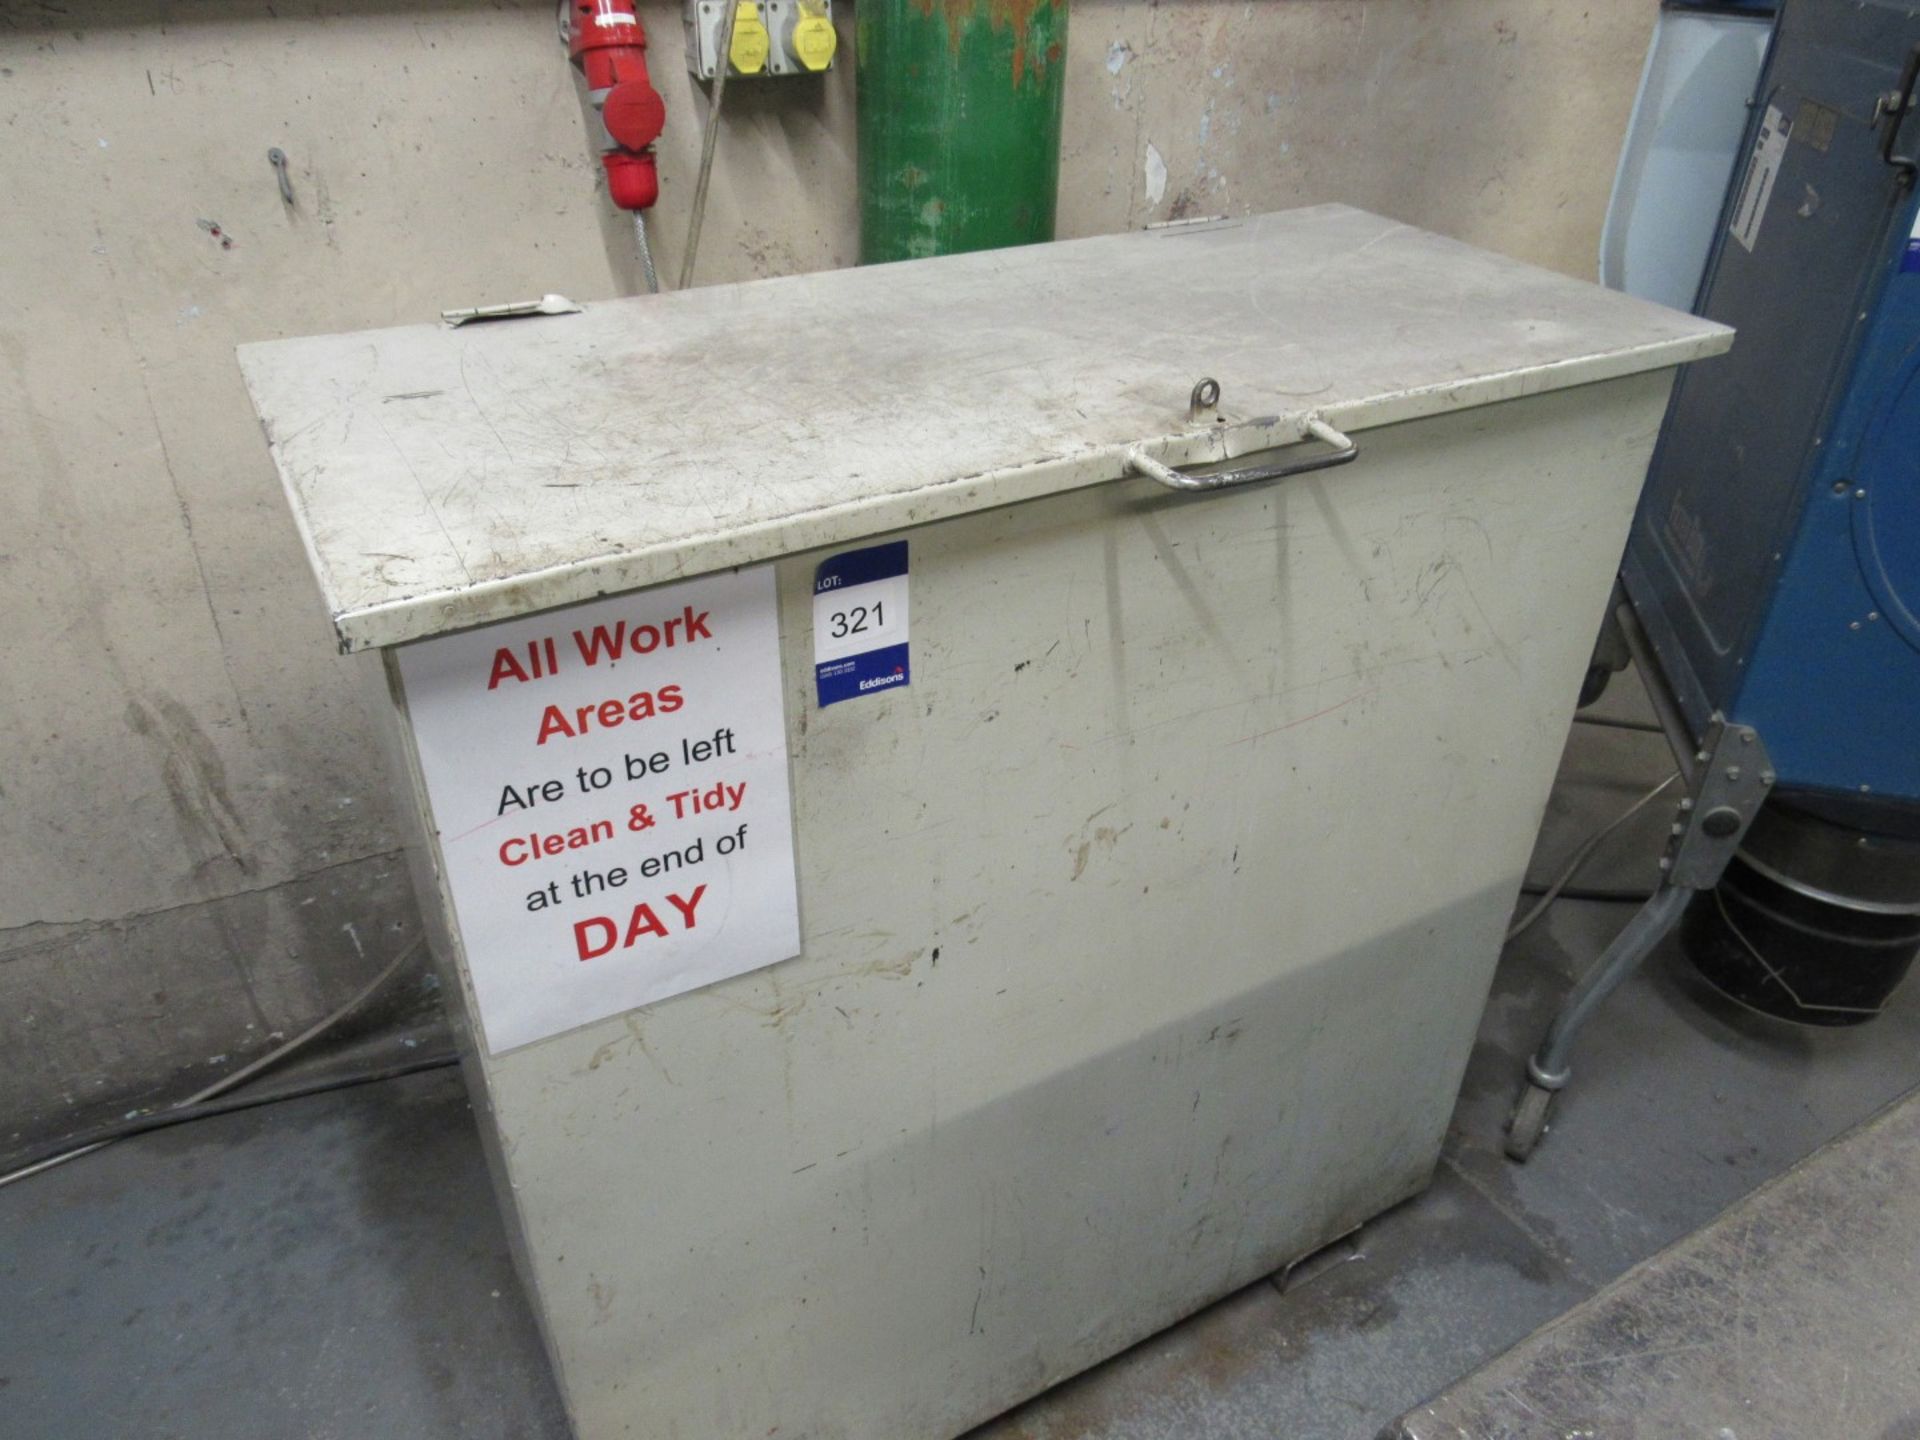 Metal Welding Rod Storage Cabinet, 1070mm x 470mm x 1140mm high, and contents